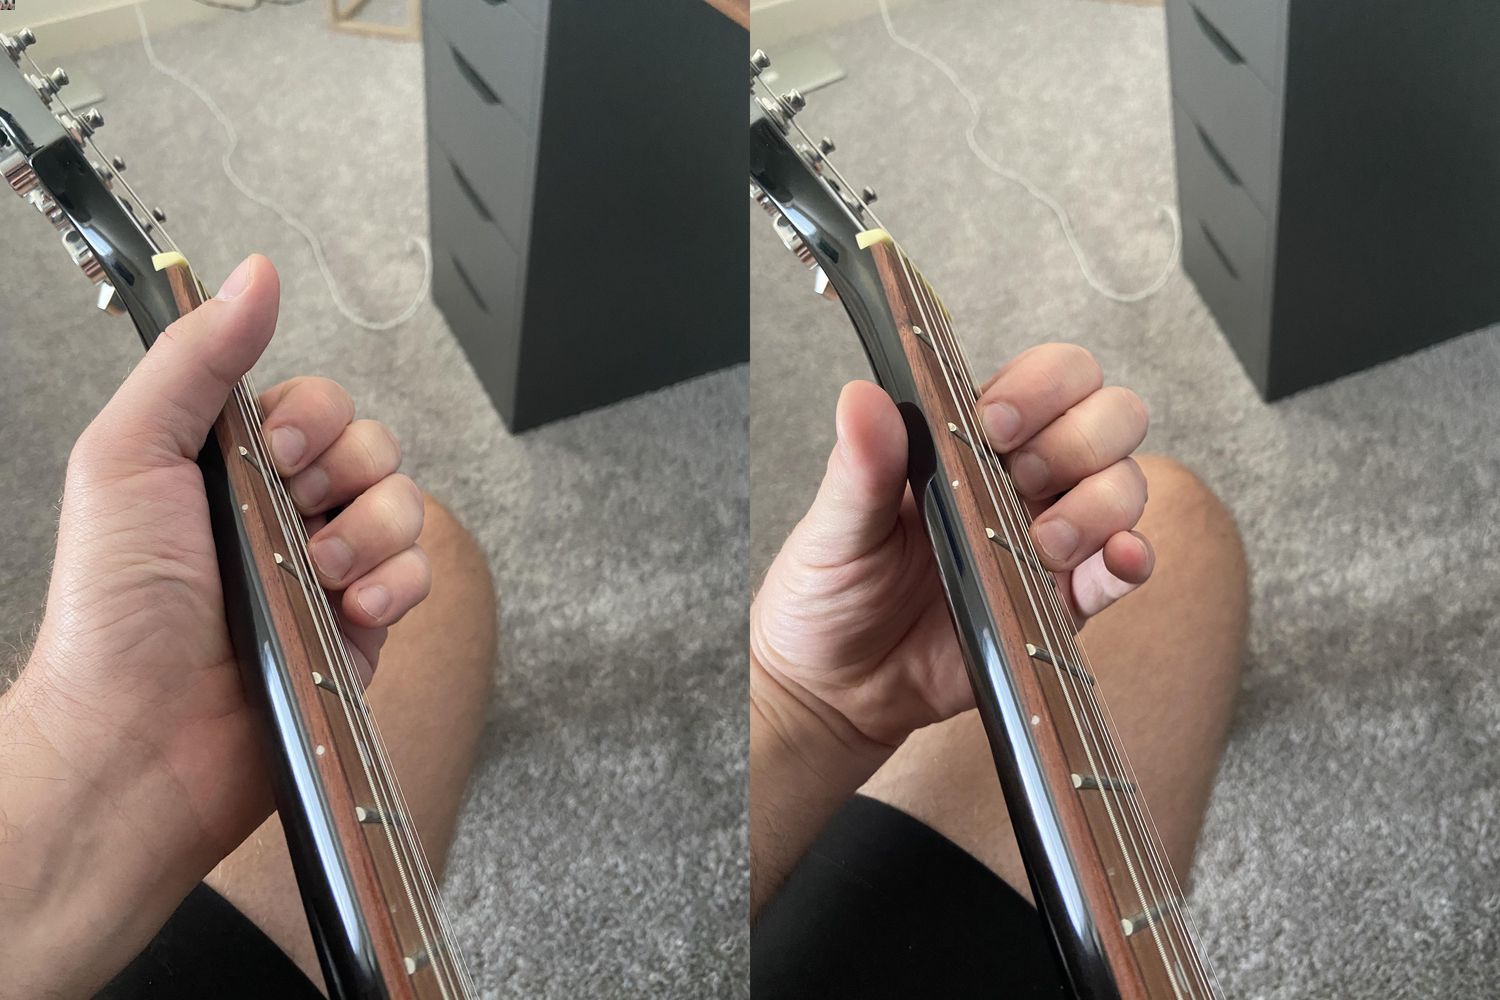 How To Hold A Guitar Neck